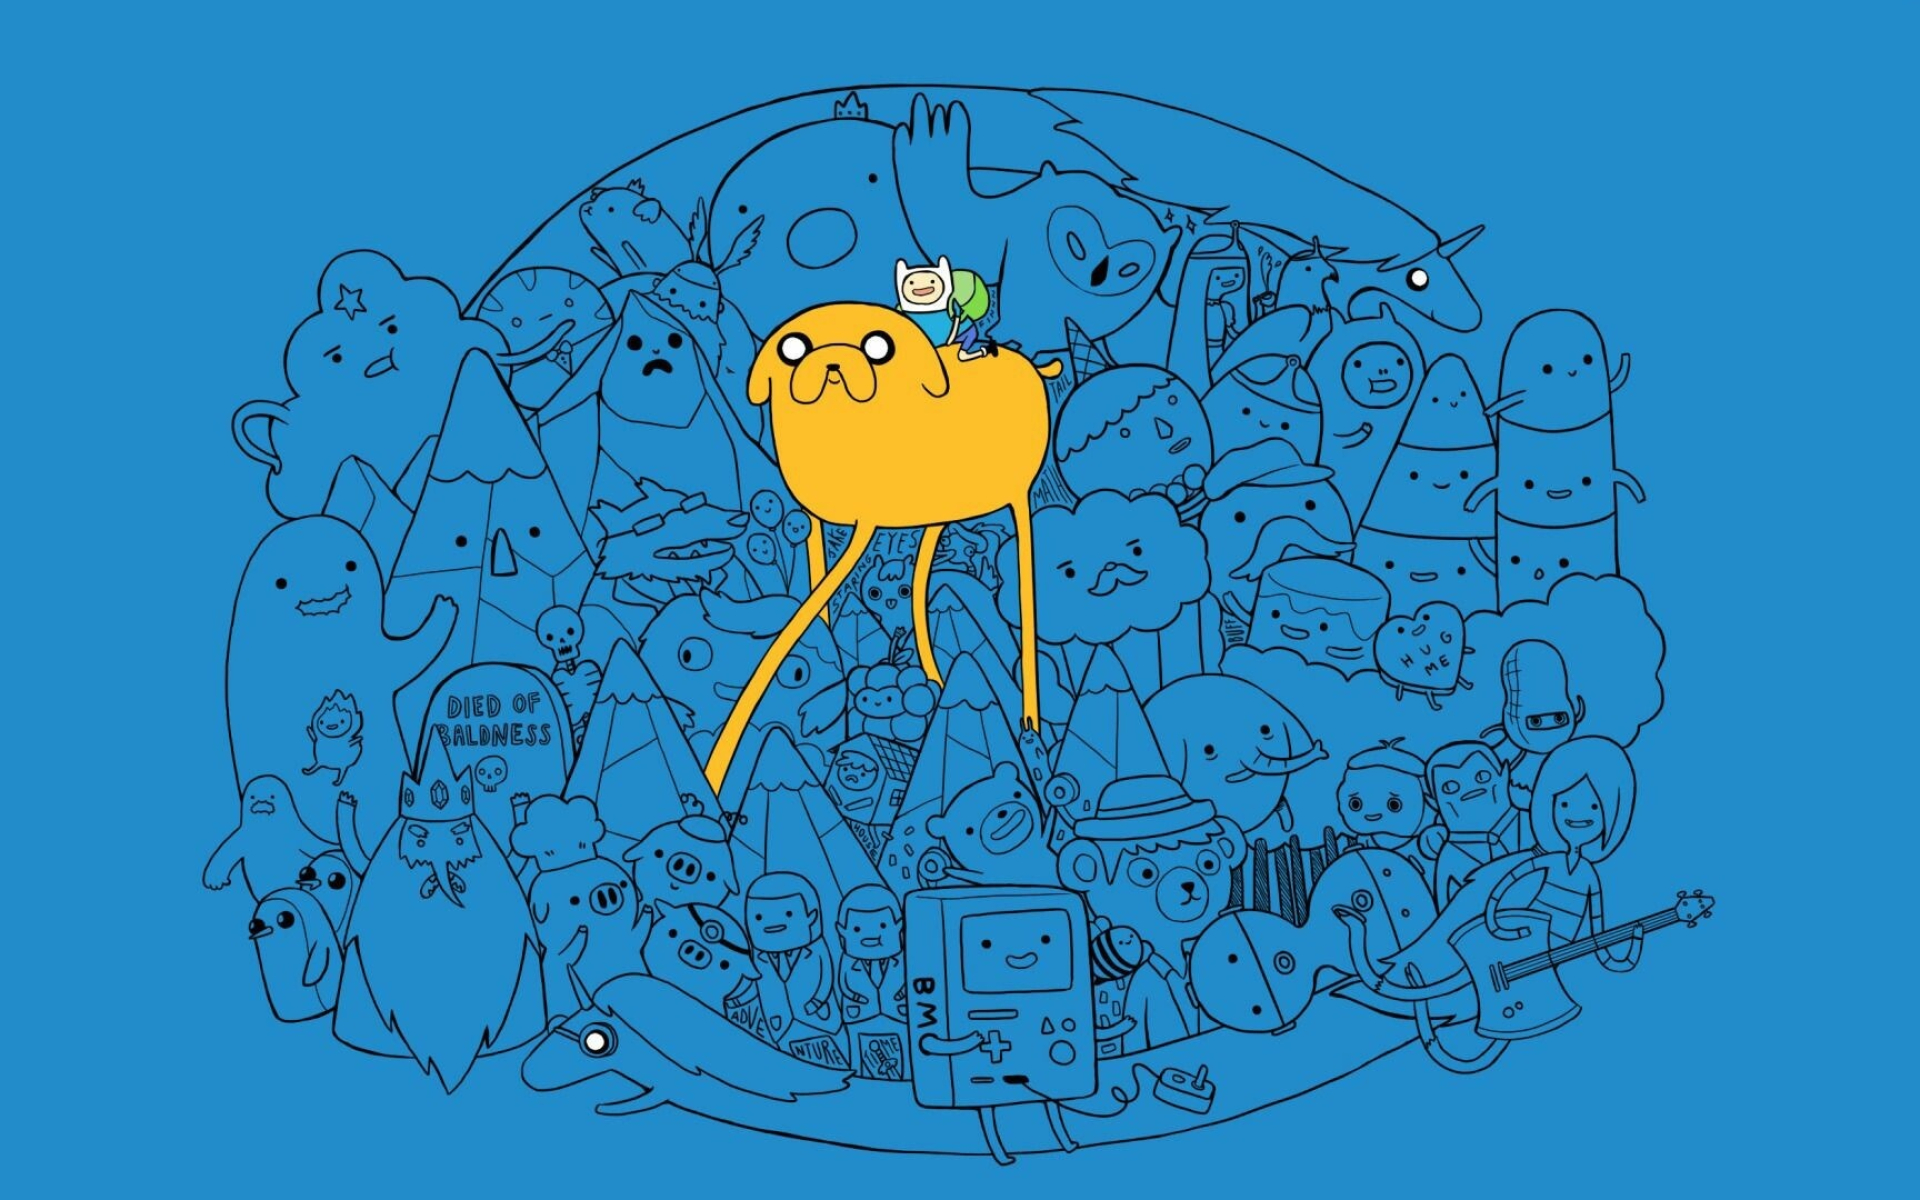 Finn and Jake, HD wallpapers, PC and mobile images, Free download, 1920x1200 HD Desktop